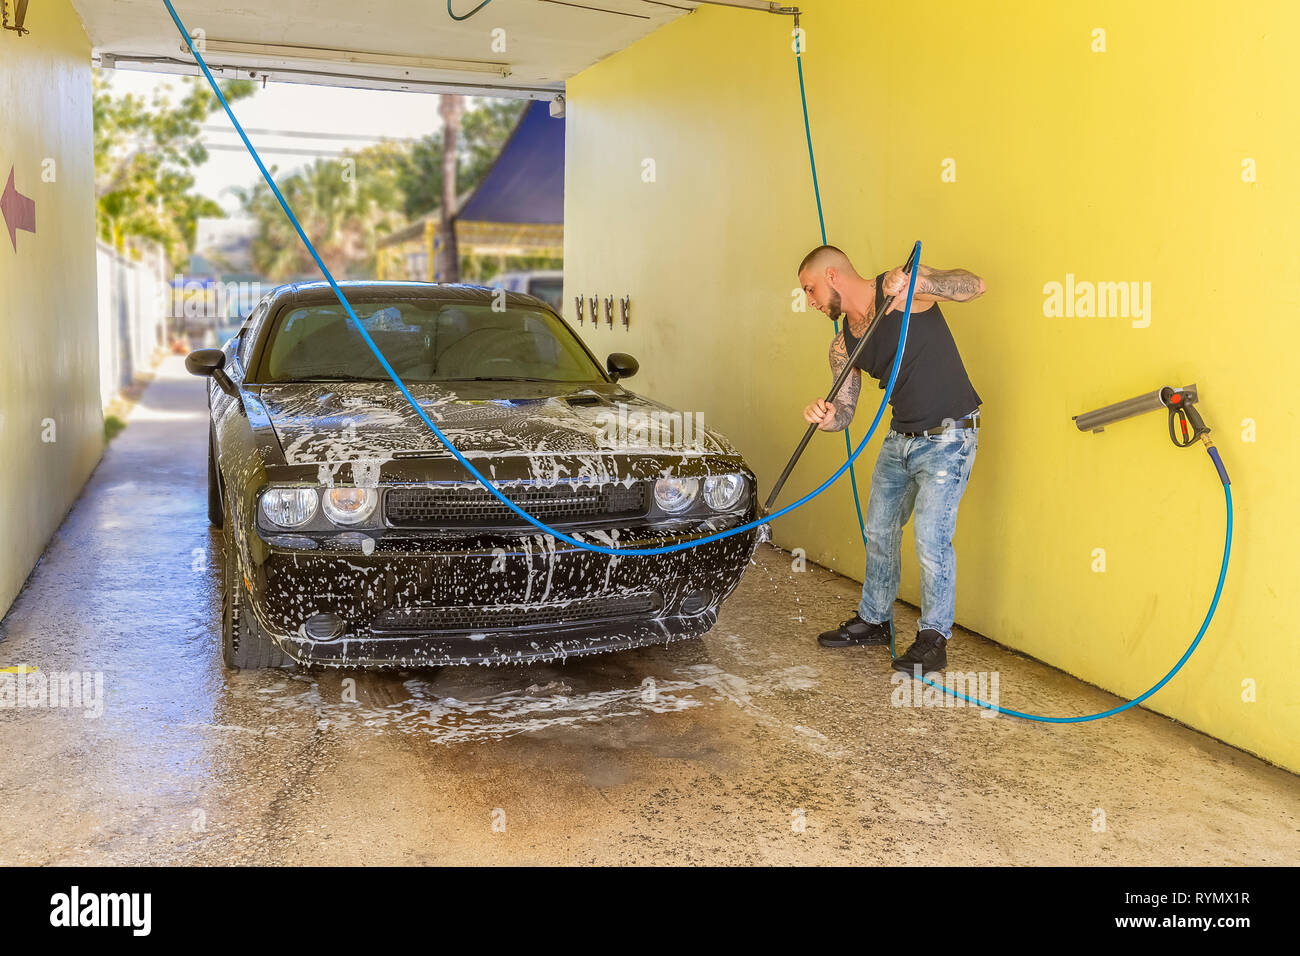 A man is washing his car in carwash bay. The masculine young adult with tattoos soaps up the car by scrubbing every detail. Stock Photo